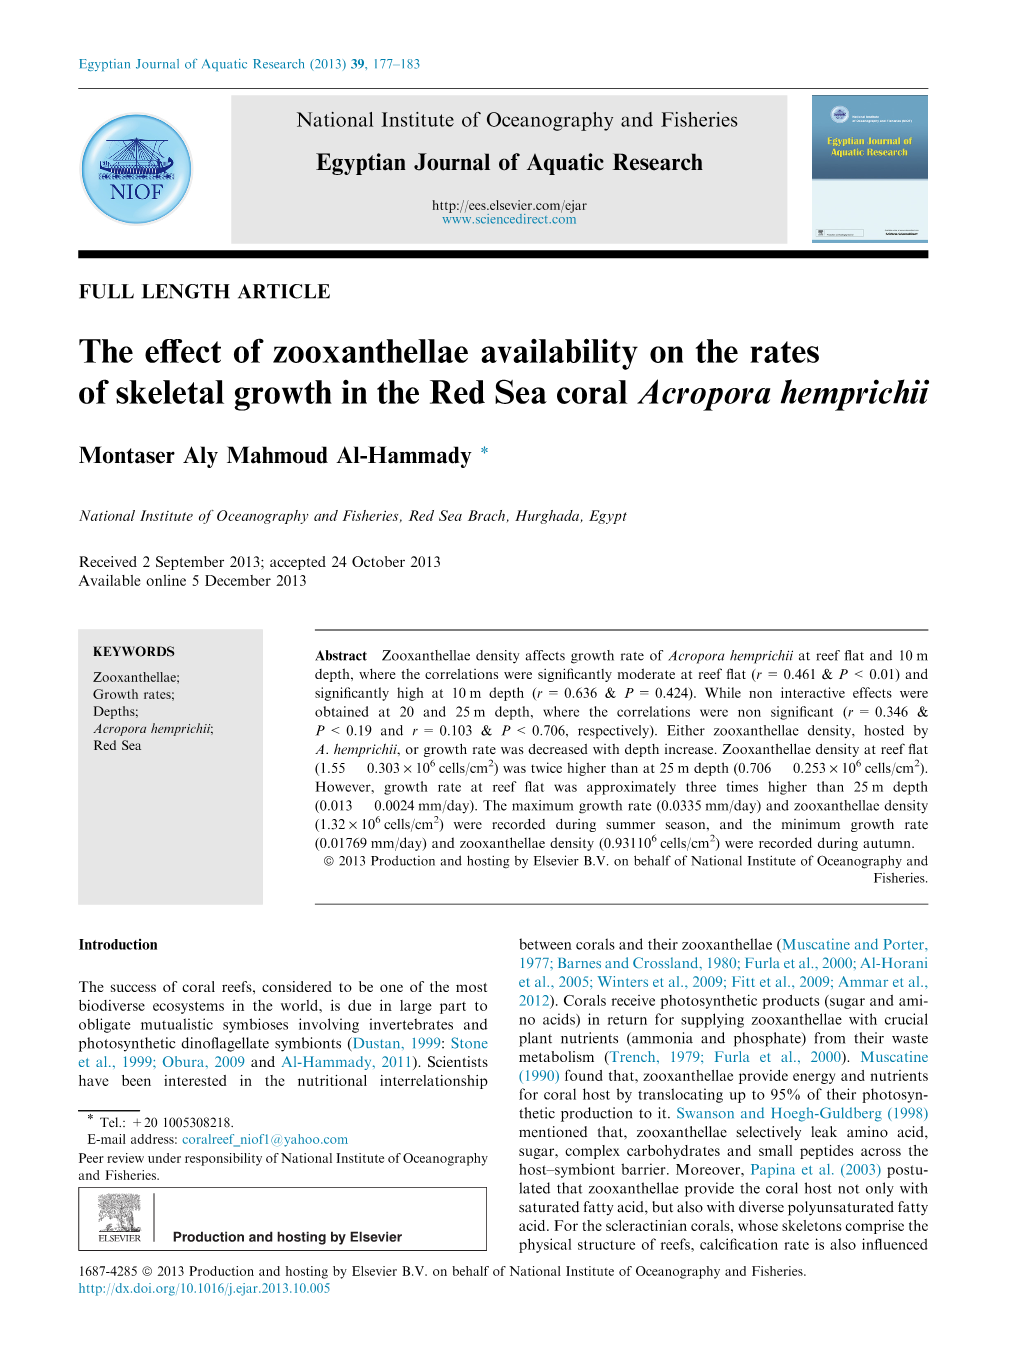 The Effect of Zooxanthellae Availability on the Rates of Skeletal Growth in the Red Sea Coral Acropora Hemprichii 179